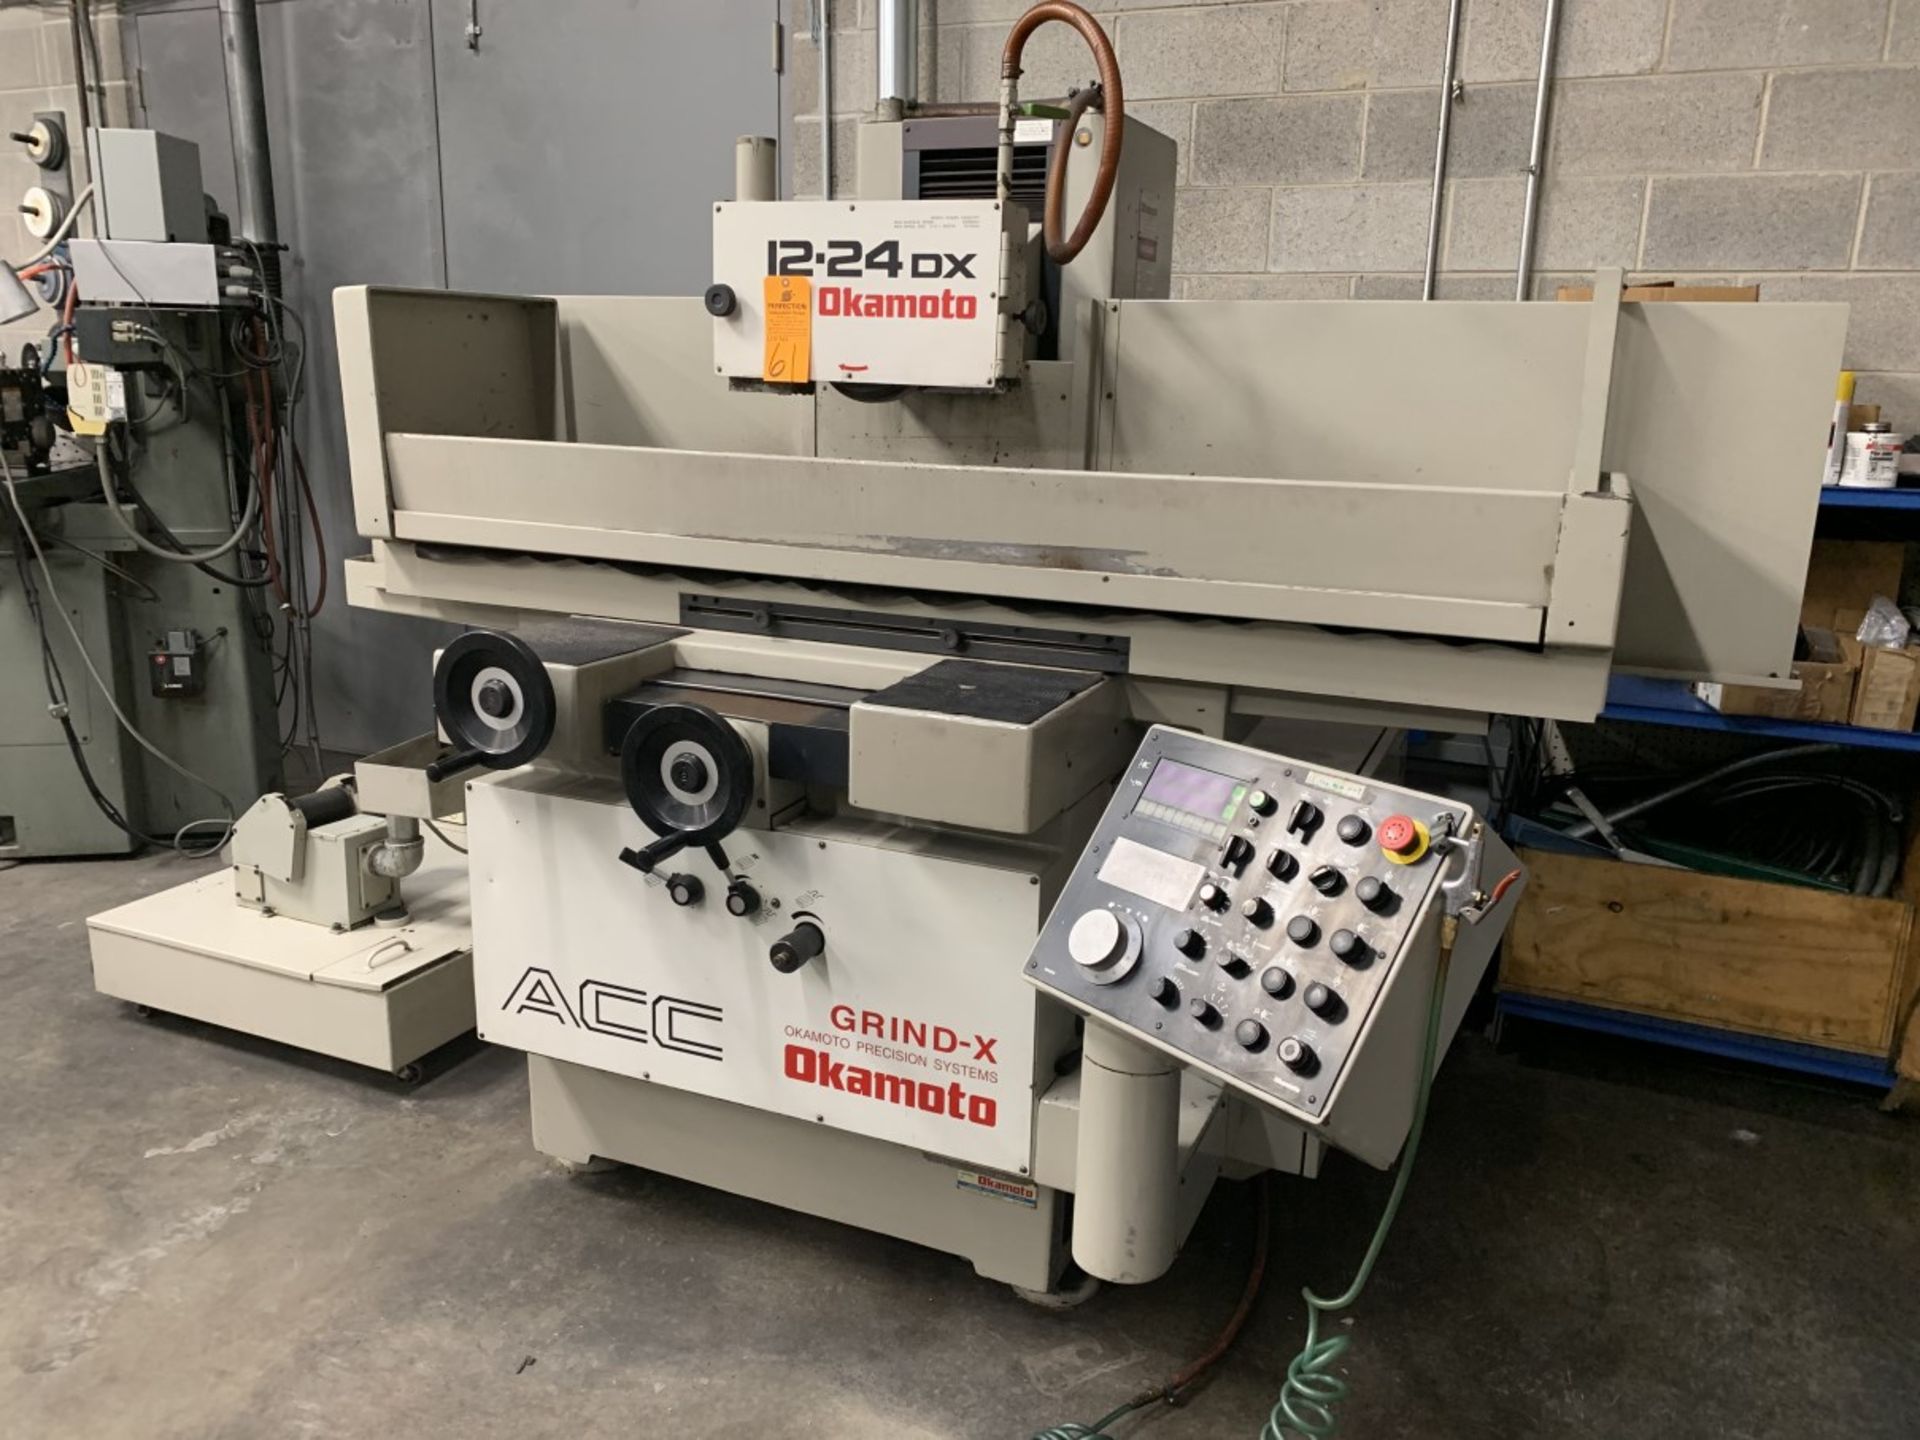 2003 OKAMOTO ACC-1224DX Surface Grinder, s/n 64984 (Located at: R & D Components) - Image 2 of 3